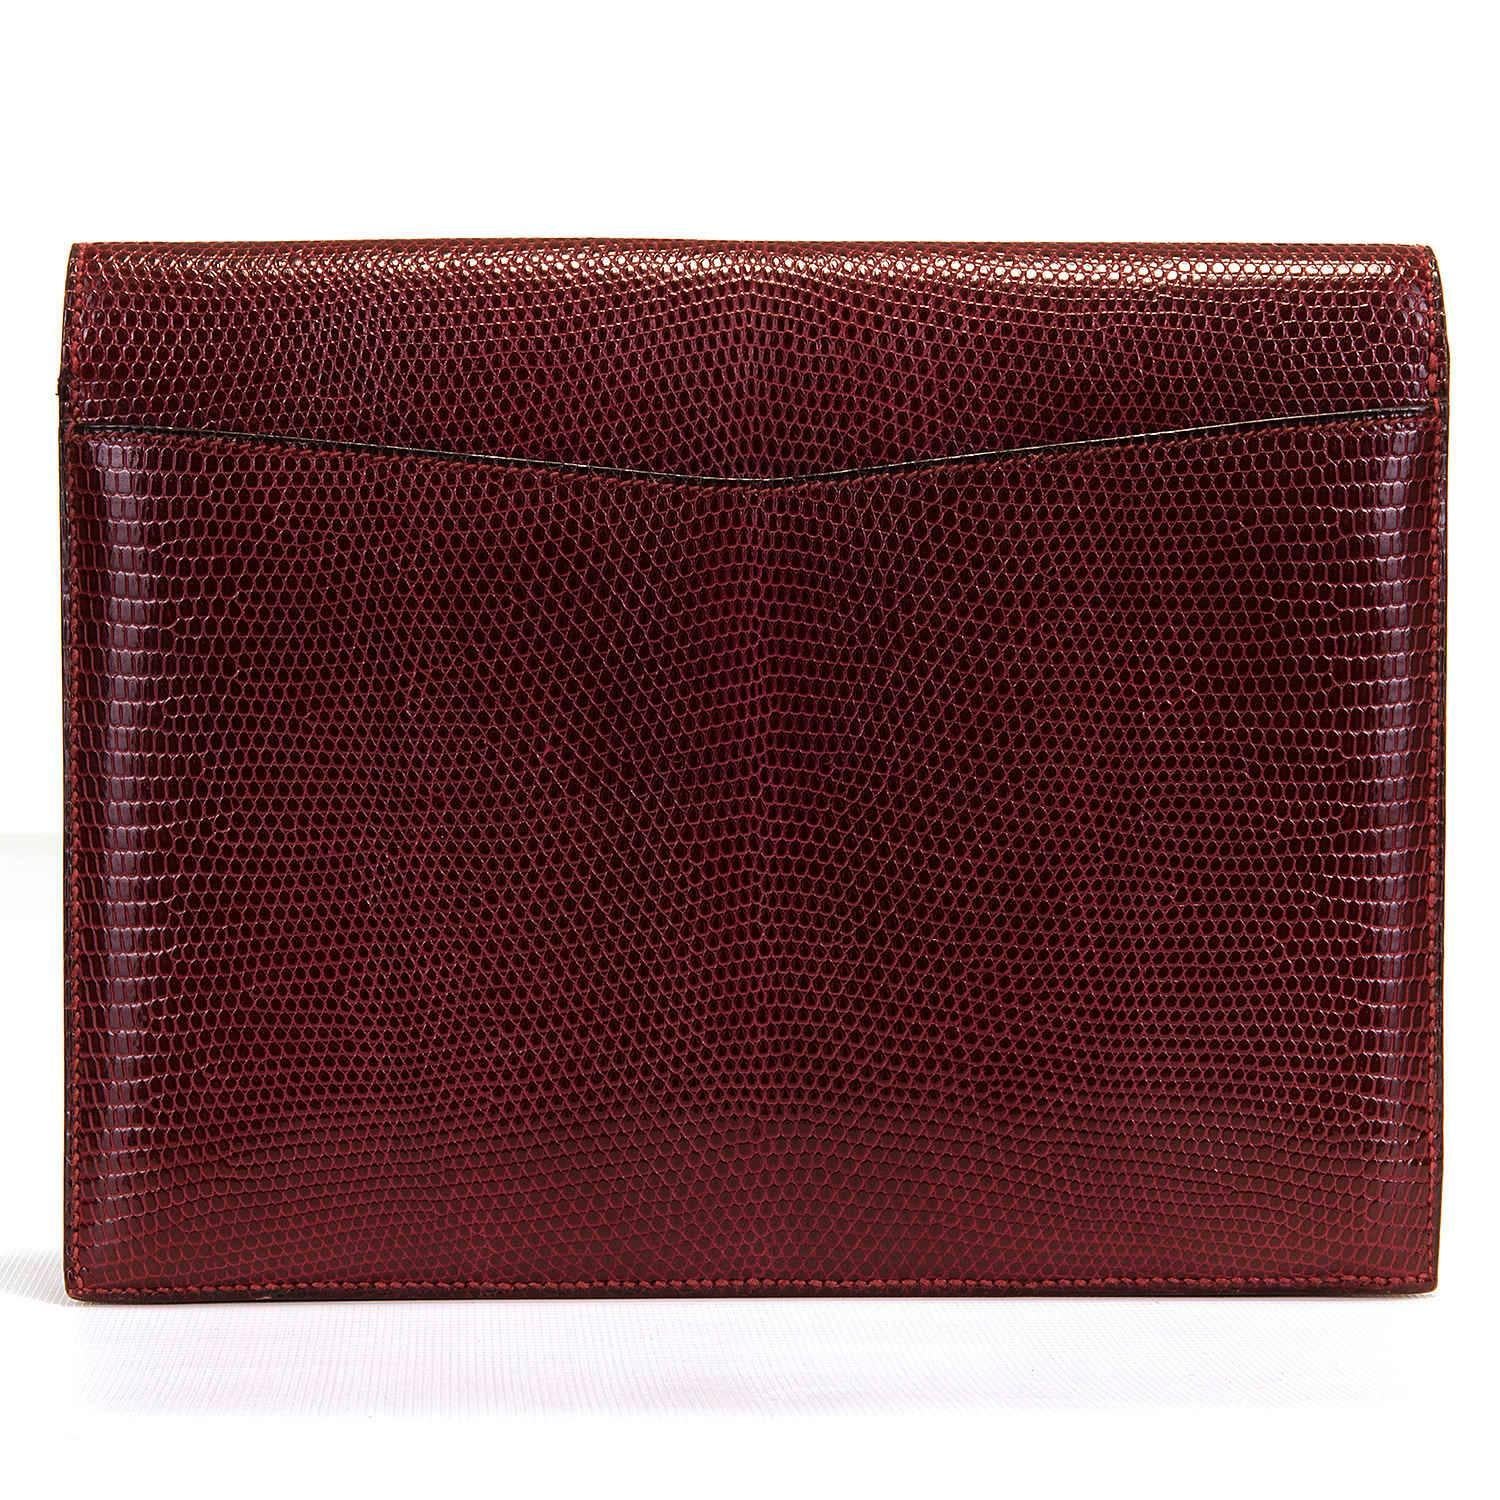 Brown TRES CHIC Vintage Hermes 'Faco' Burgundy Lizard Clutch Bag in Pristine Condition